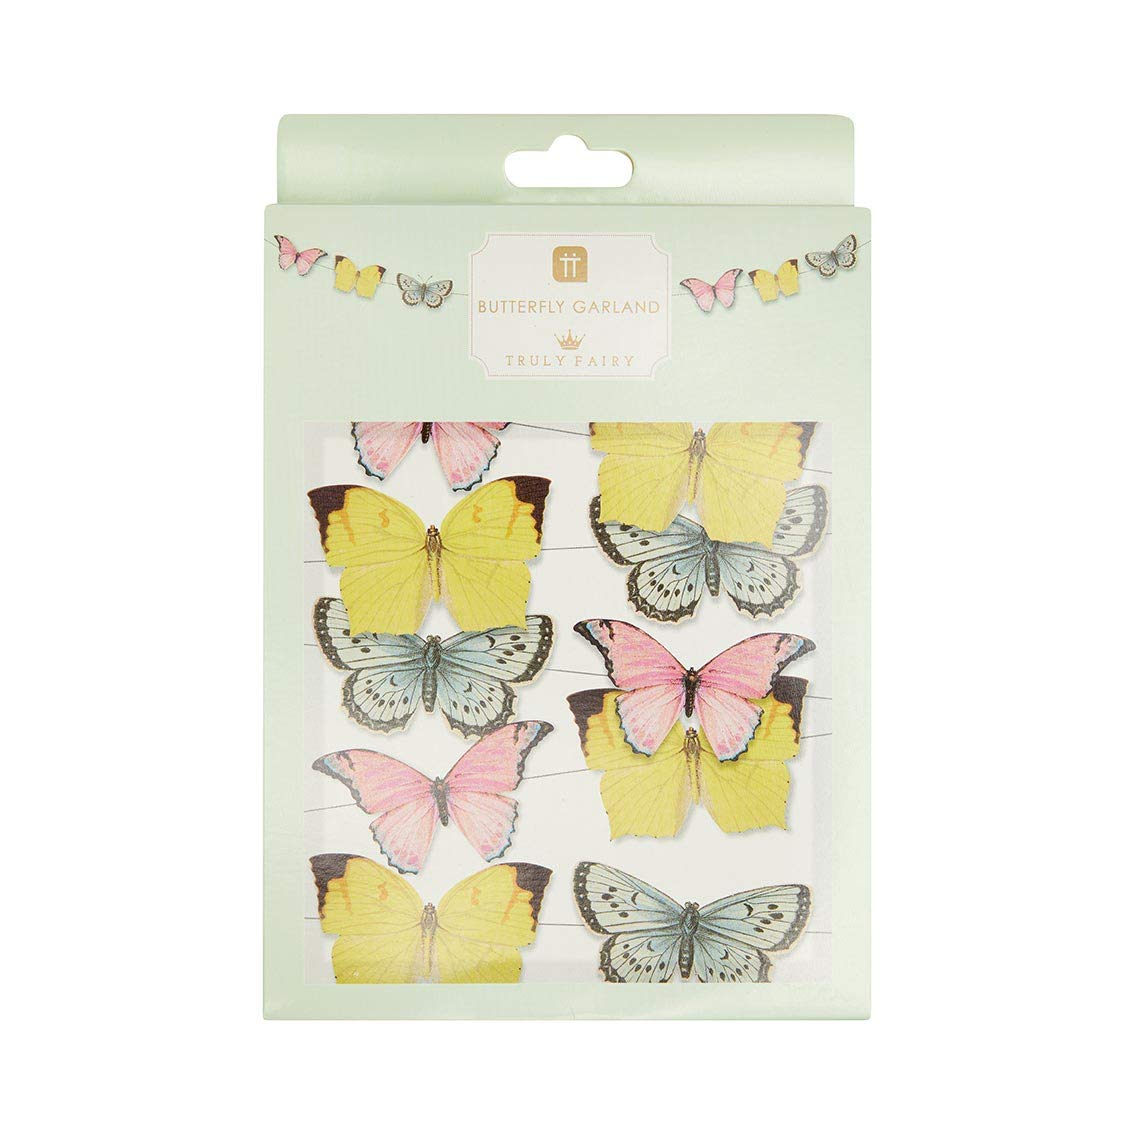 Talking Tables 3D Butterfly Garland Bunting | Pastel Birthday Decorations | Supplies for Kid's Fairy Party, Woodland Fairies Theme, Girls Bedroom Decor 5m (16ft)